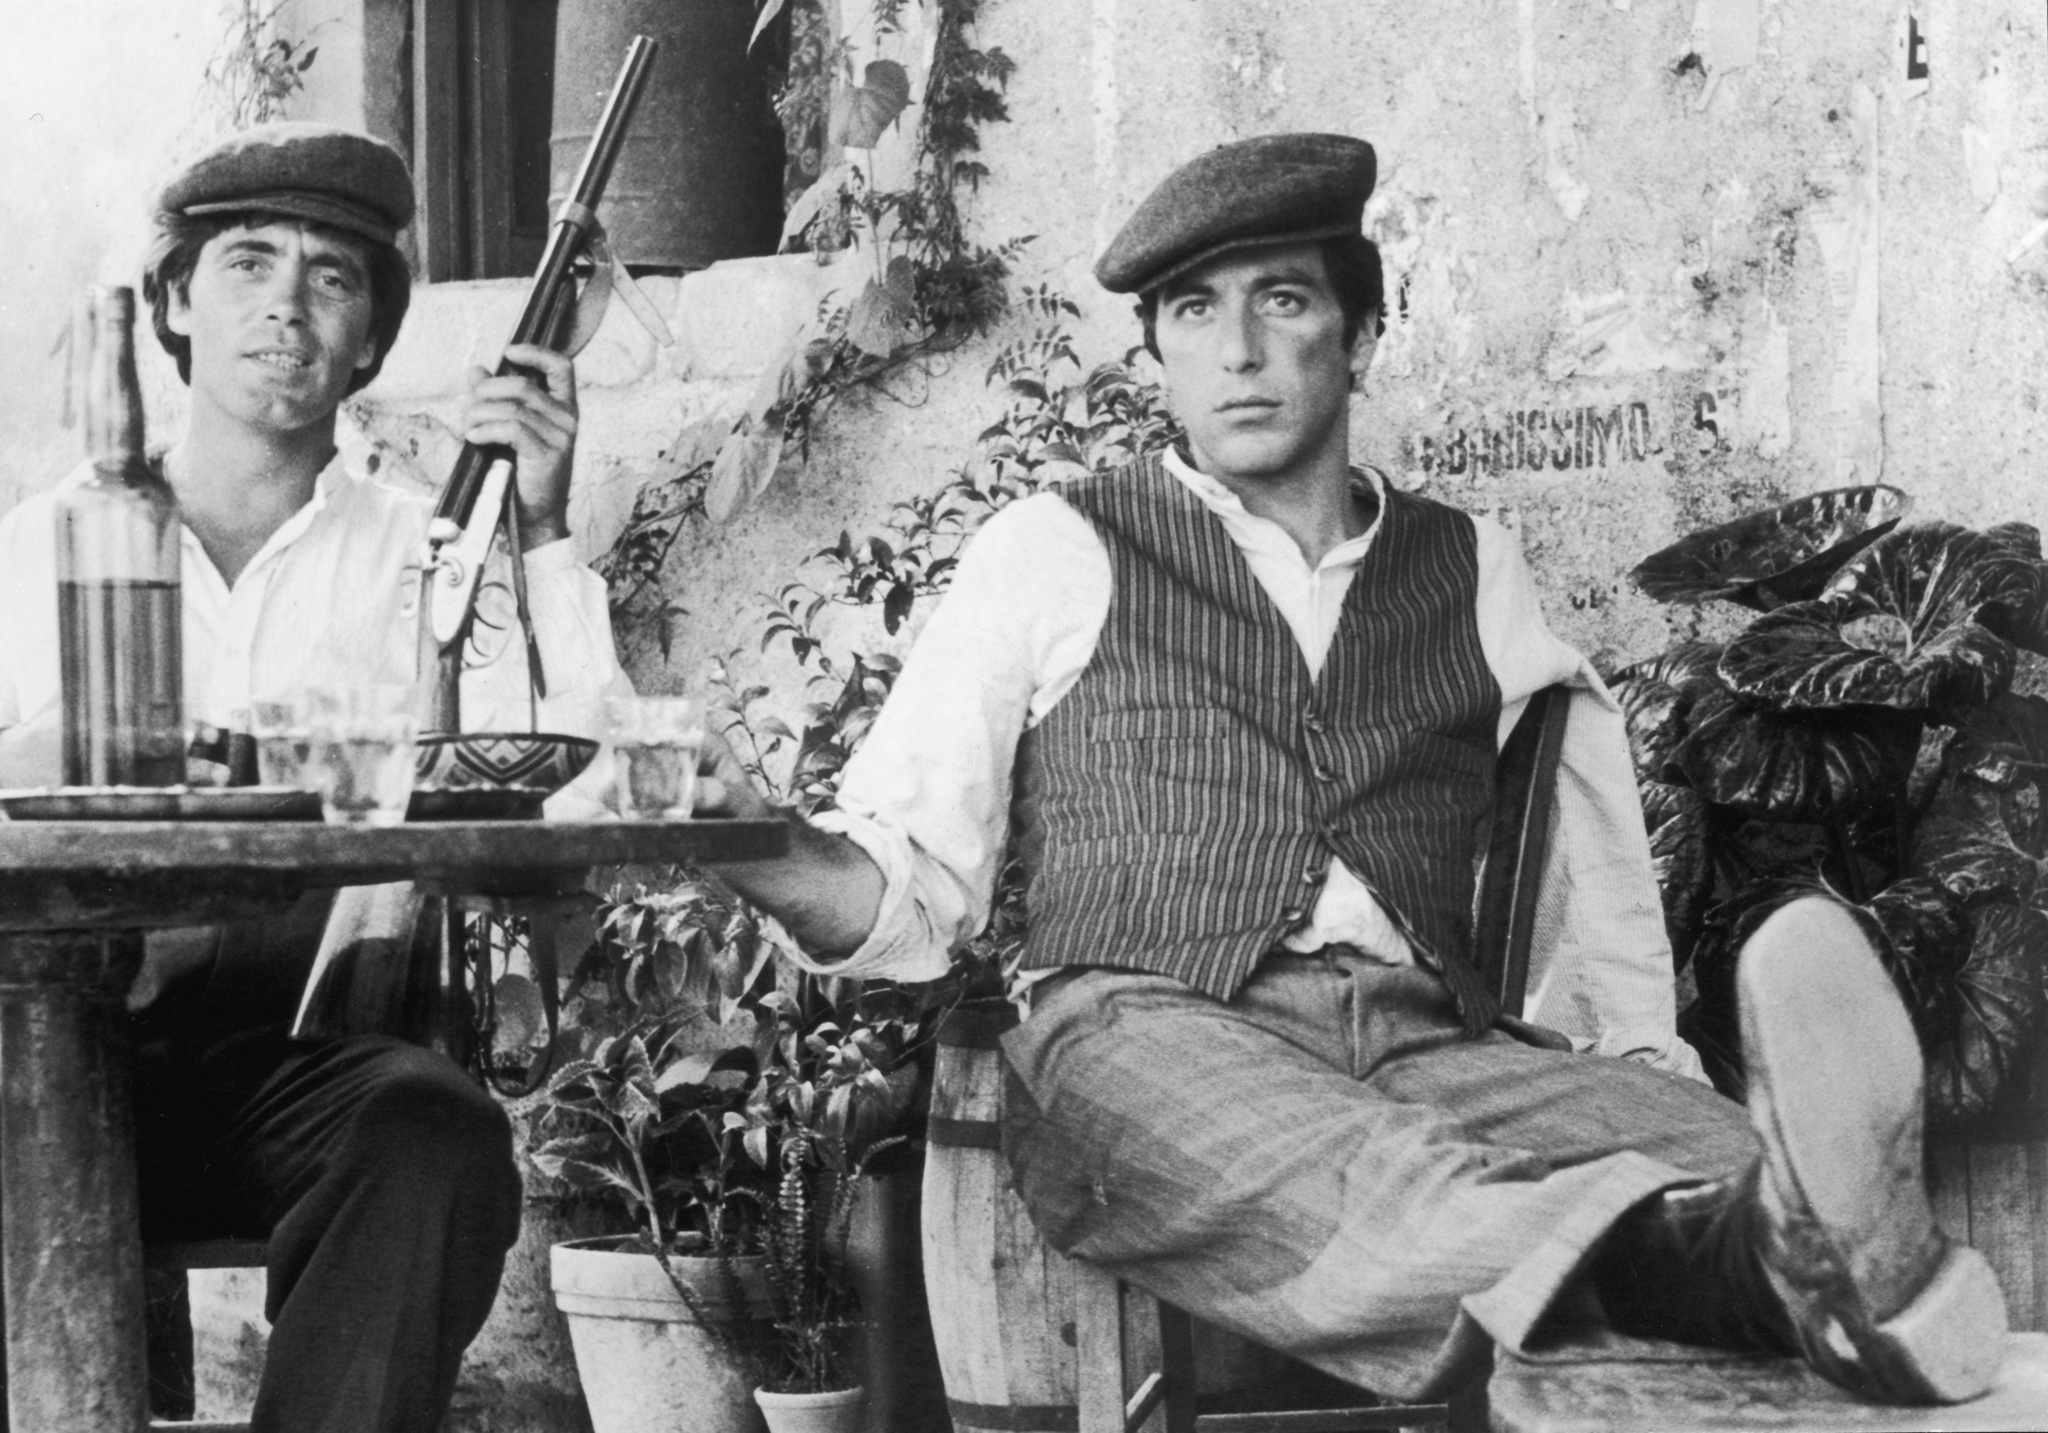 Al Pacino and Franco Citti in The Godfather (1972)